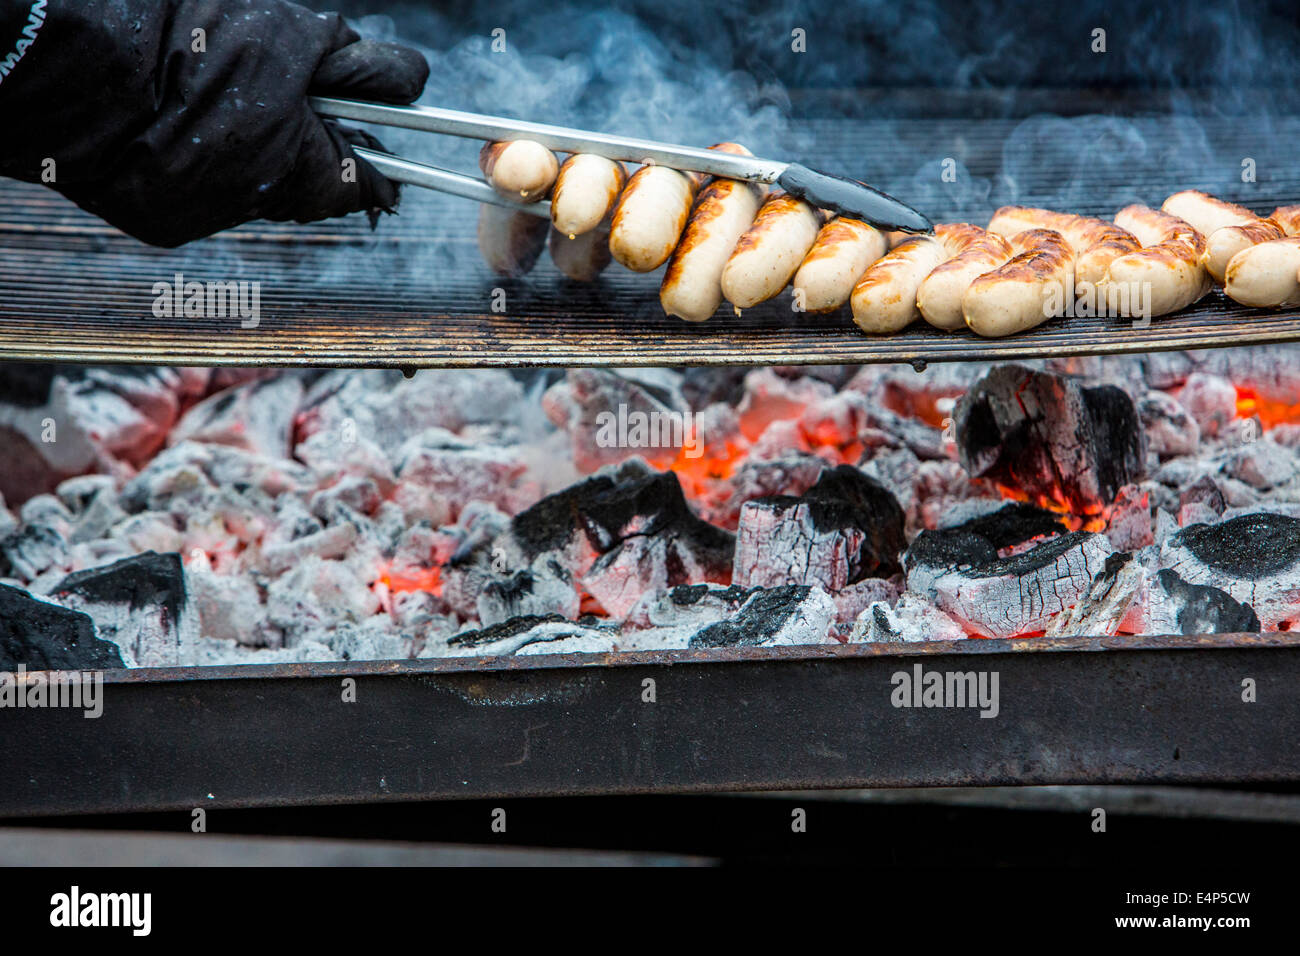 Grill sausages are grilled on a charcoal grill, Stock Photo